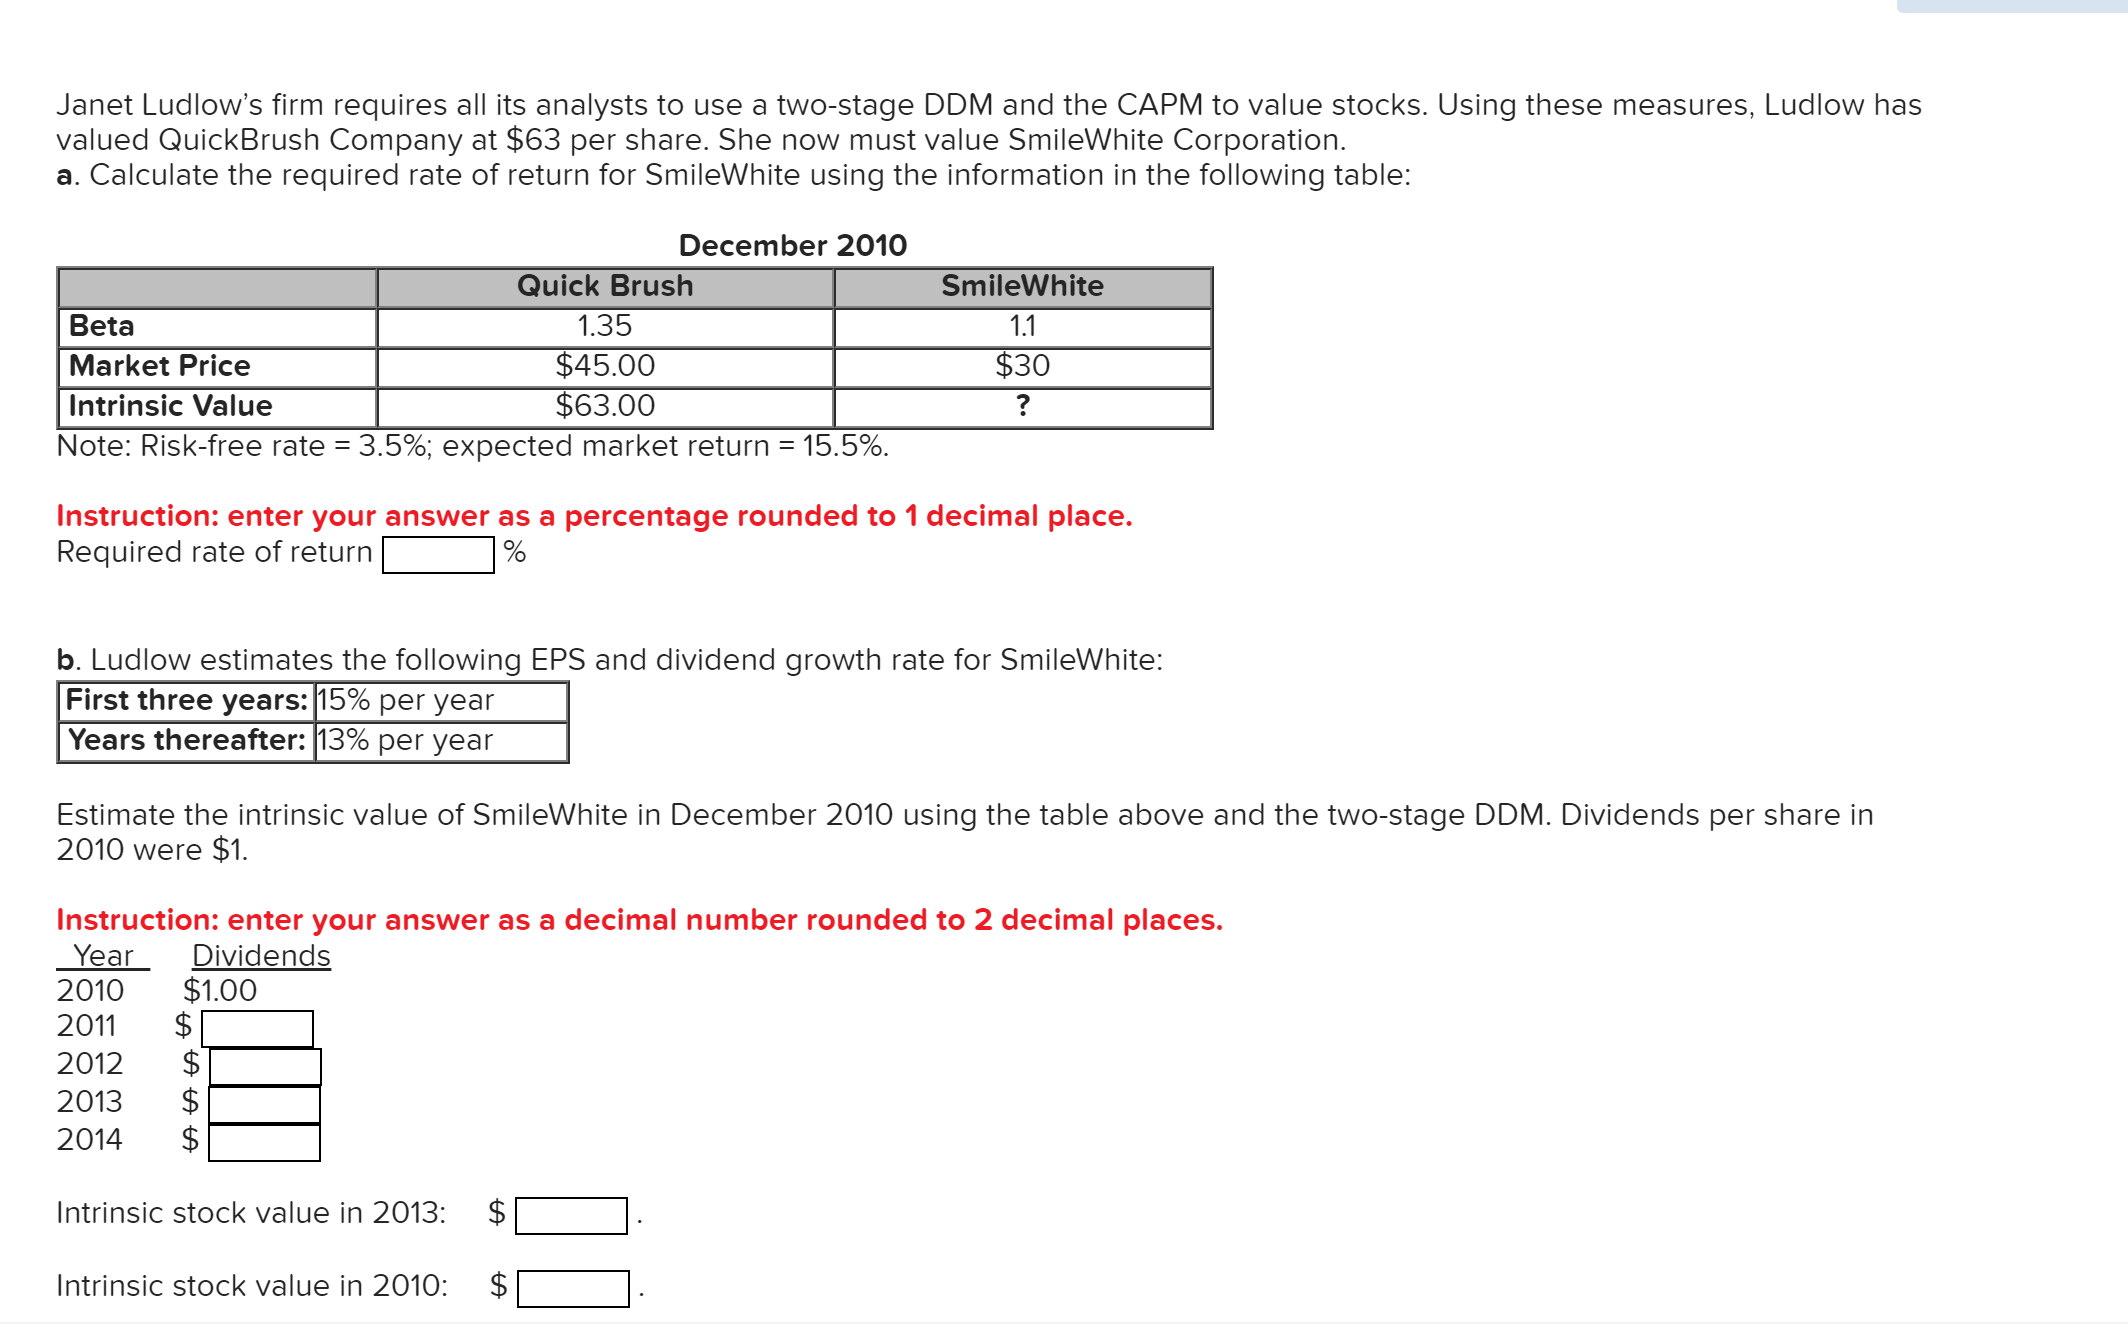 Janet Ludlow's firm requires all its analysts to use a two-stage DDM and the CAPM to value stocks. Using these measures, Ludlow has
valued QuickBrush Company at $63 per share. She now must value SmileWhite Corporation.
a. Calculate the required rate of return for SmileWhite using the information in the following table:
December 2010
Quick Brush
SmileWhite
1.35
Beta
1.1
$30
$45.00
$63.00
Market Price
Intrinsic Value
Note: Risk-free rate 3.5%; expected market return 15.5%.
Instruction: enter your answer as a percentage rounded to 1 decimal place.
Required rate of return
b. Ludlow estimates the following EPS and dividend growth rate for SmileWhite:
First three years: 15% per year
Years thereafter: 13% per year
Estimate the intrinsic value of SmileWhite in December 2010 using the table above and the two-stage DDM. Dividends per share in
2010 were $1.
Instruction: enter your answer as a decimal number rounded to 2 decimal places.
Year
2010
Dividends
$1.00
$
$
$
$
2011
2012
2013
2014
$
Intrinsic stock value in 2013:
$
Intrinsic stock value in 201O:
